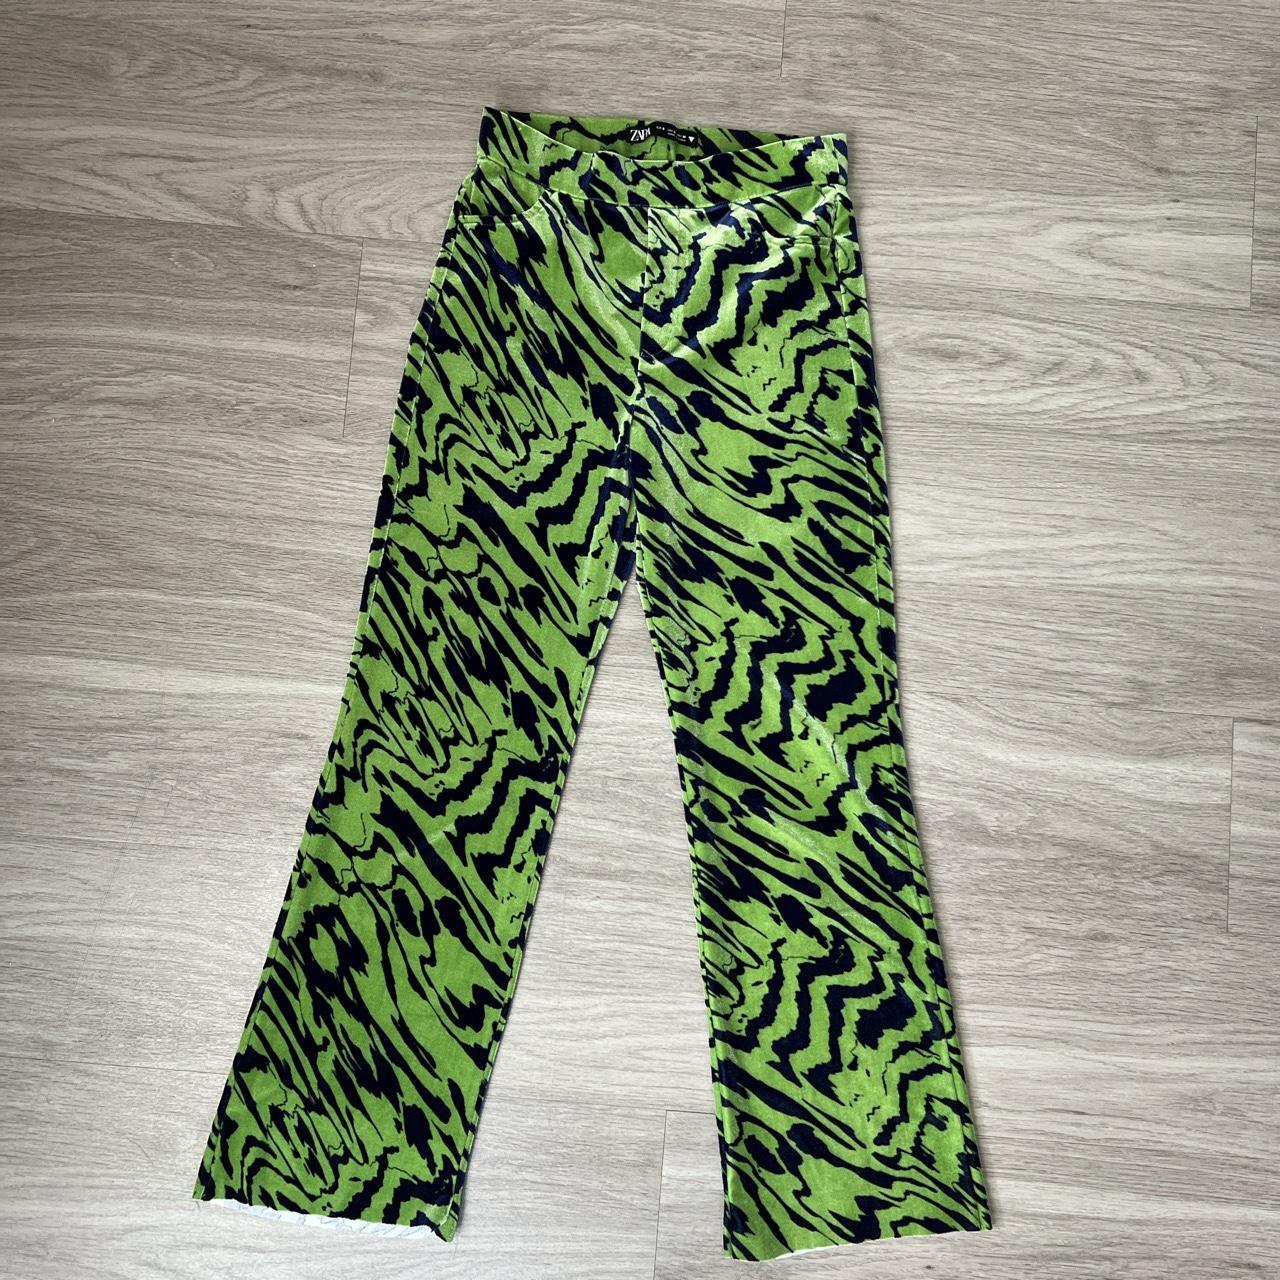 Zara pattern pants in green and blue size small - Depop